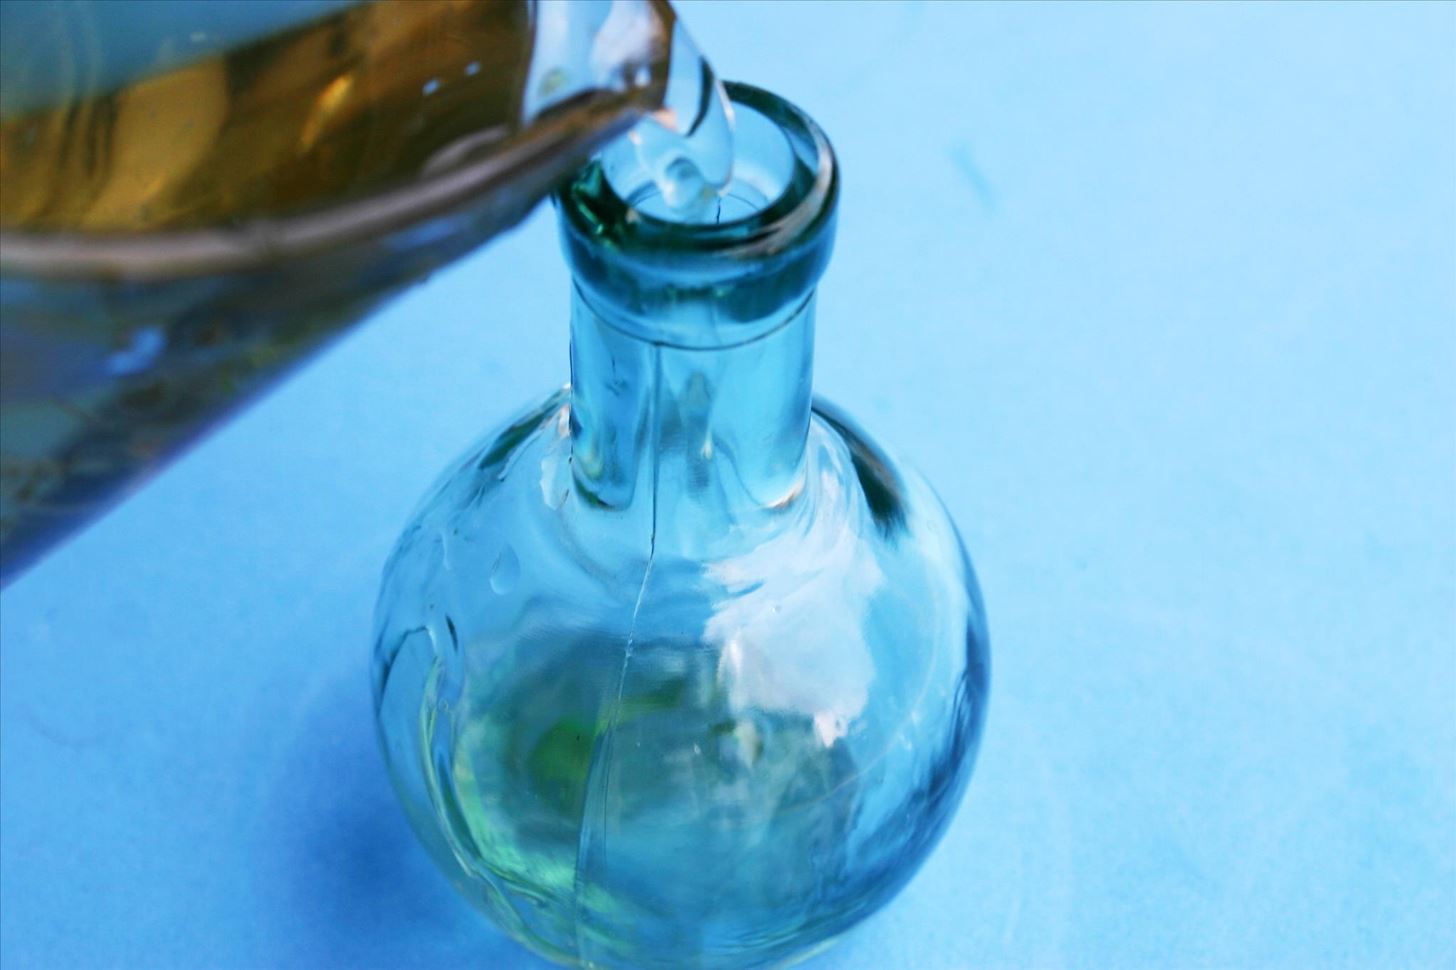 How to Make Herb-Infused Simple Syrup (& Why You Should)